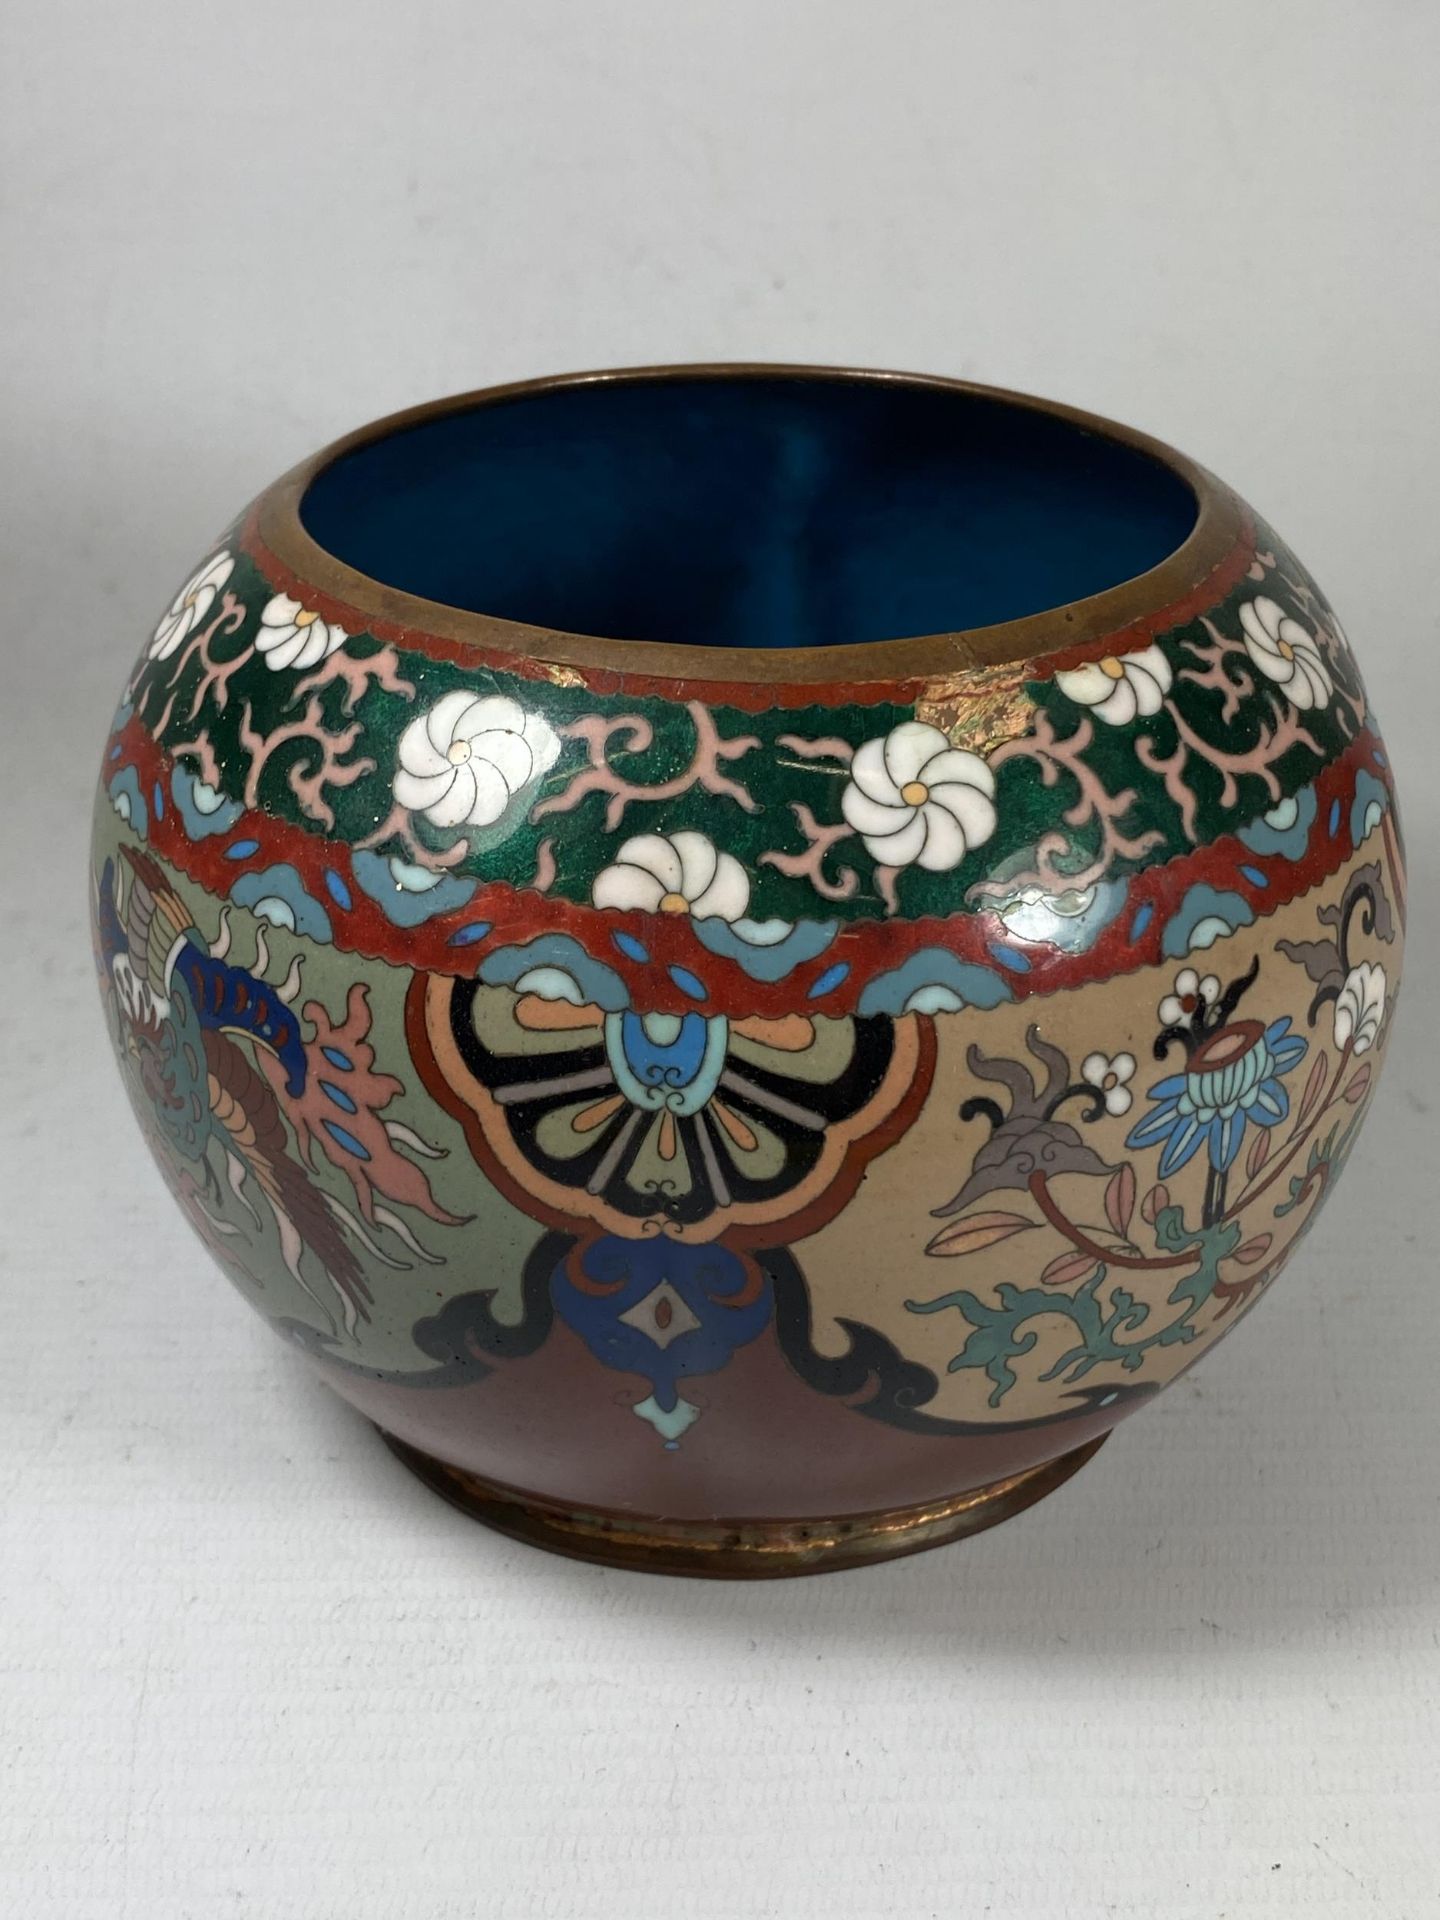 AN EARLY 20TH CENTURY CHINESE CLOISONNE POT WITH FLORAL DESIGN PANEL DESIGN, HEIGHT 12CM - Image 3 of 6